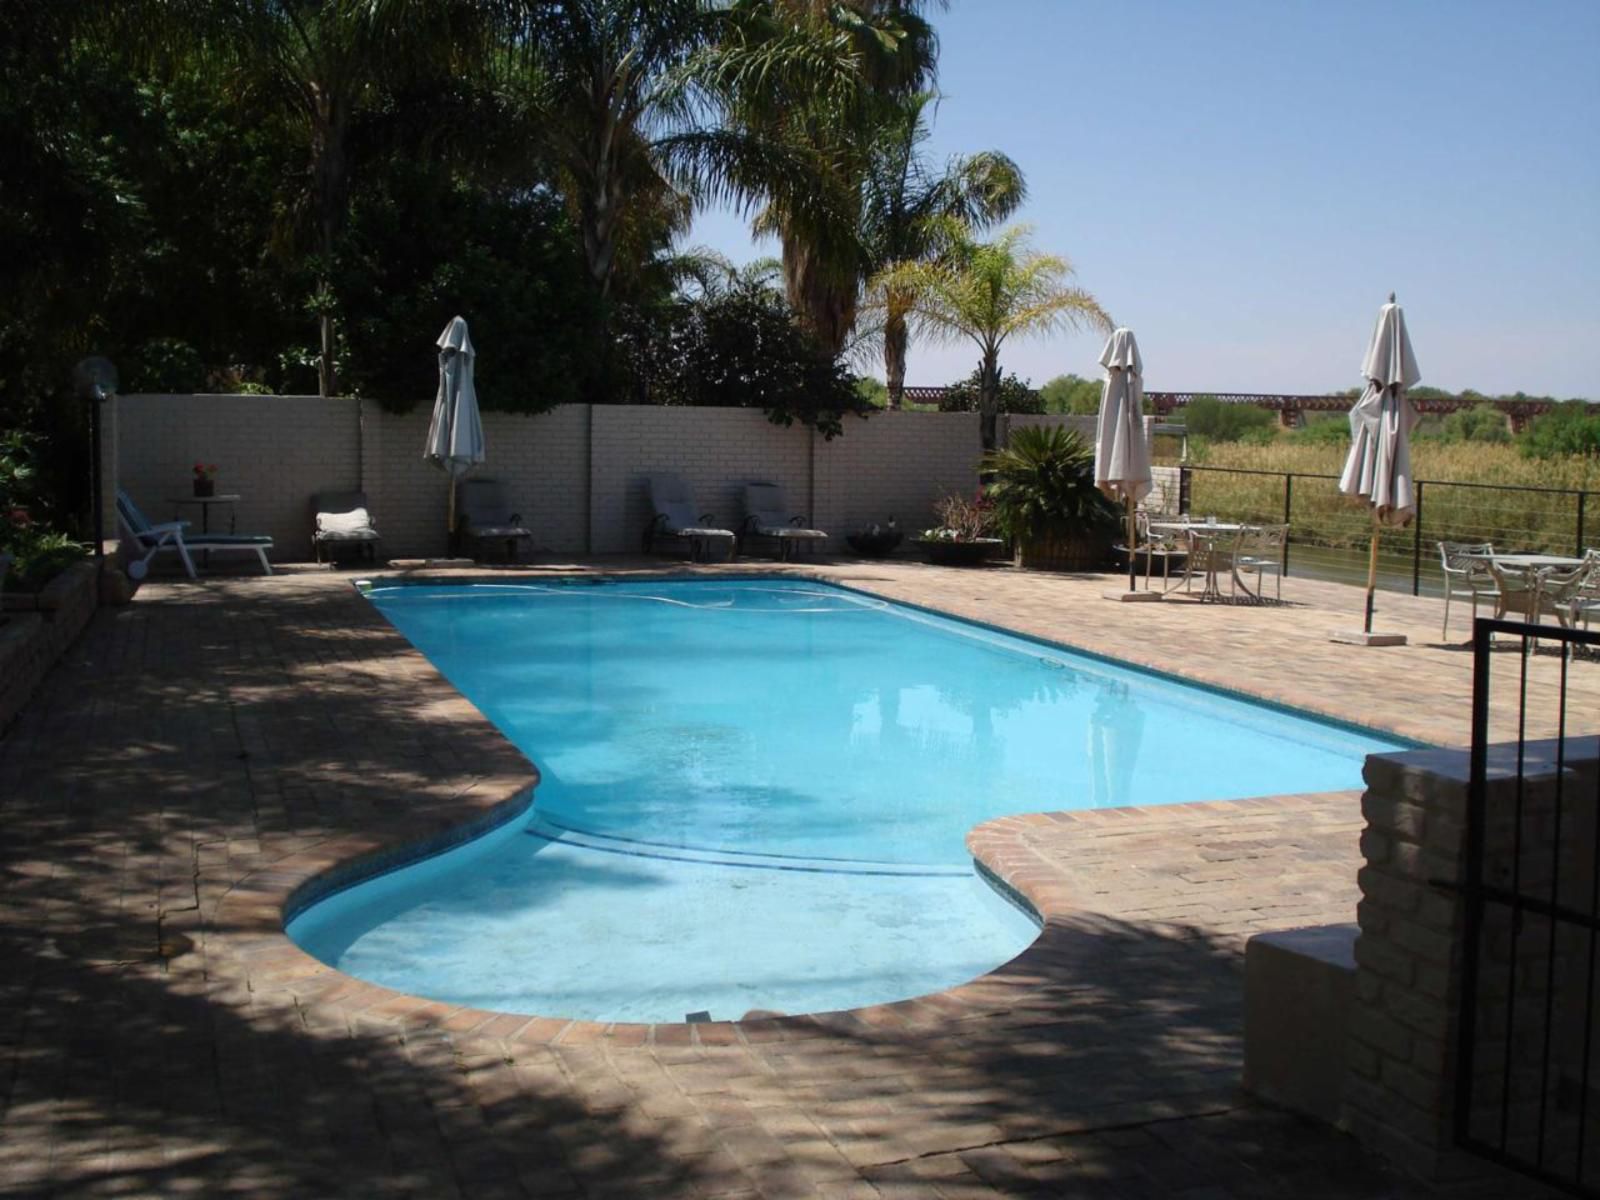 Africa River Lodge Upington Northern Cape South Africa Palm Tree, Plant, Nature, Wood, Swimming Pool